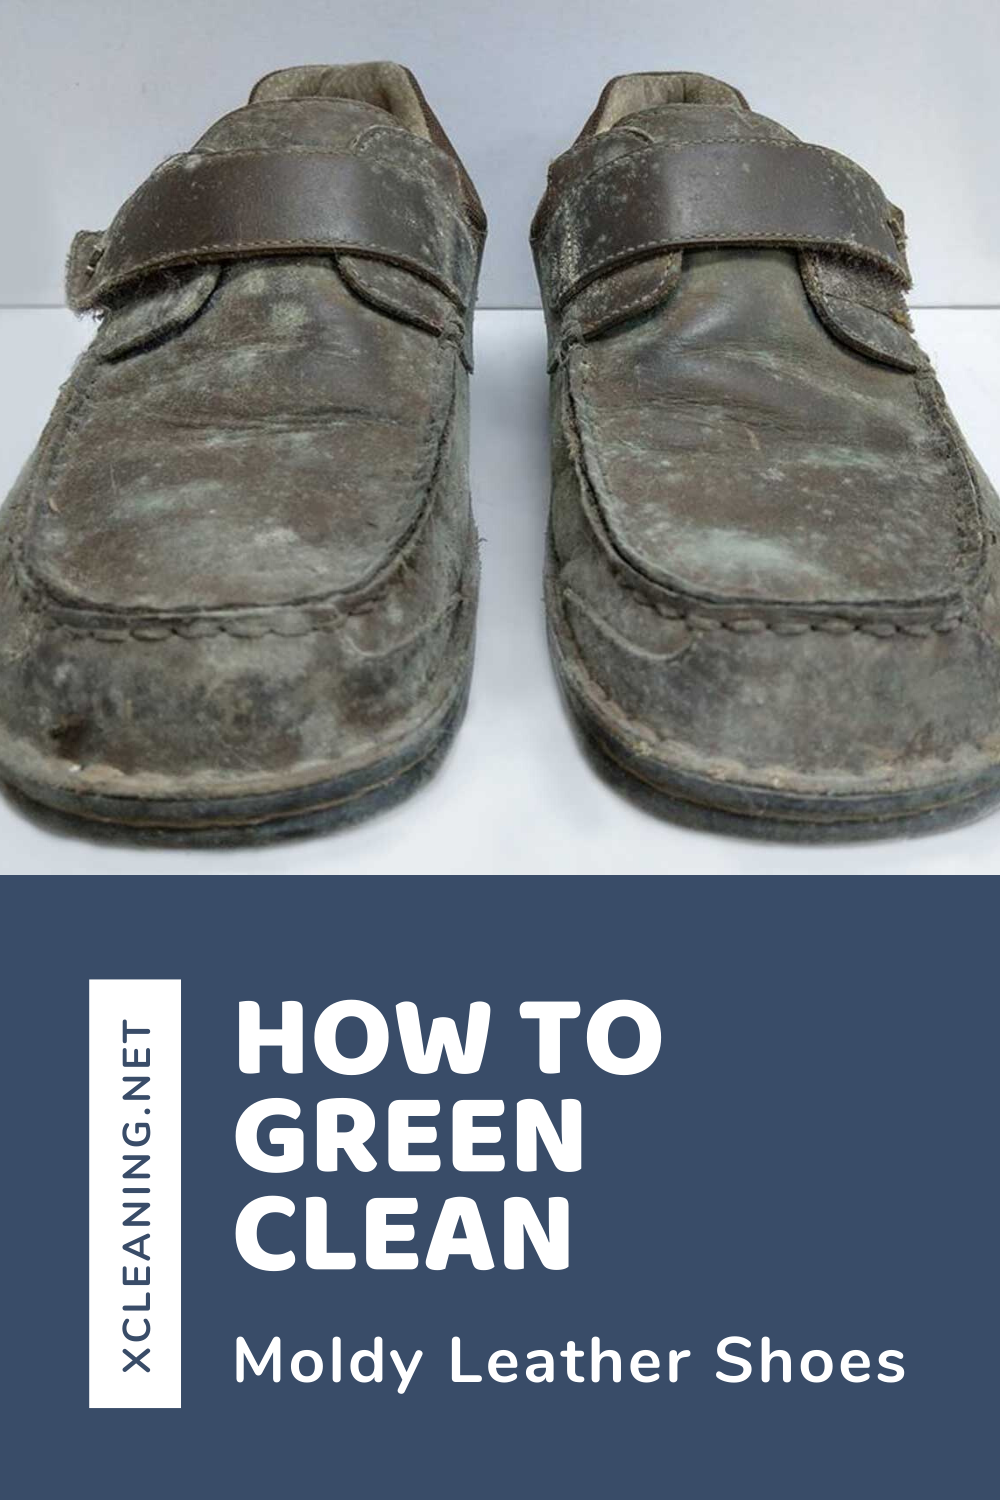 How To Green Clean Moldy Leather Shoes